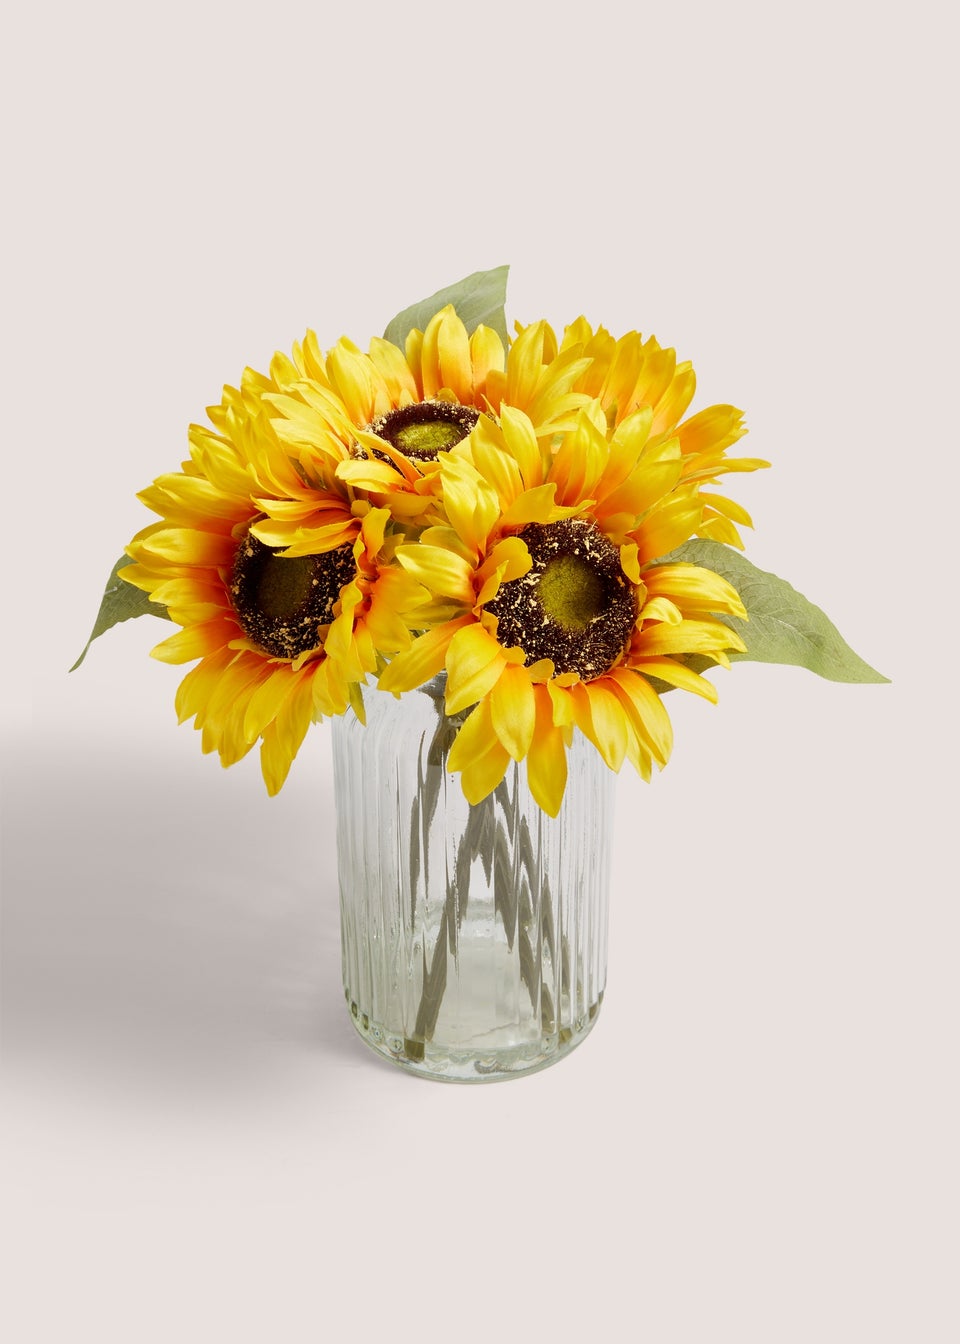 Blooms That Last: Maximizing the Lifespan of Sunflowers in a Vase插图3